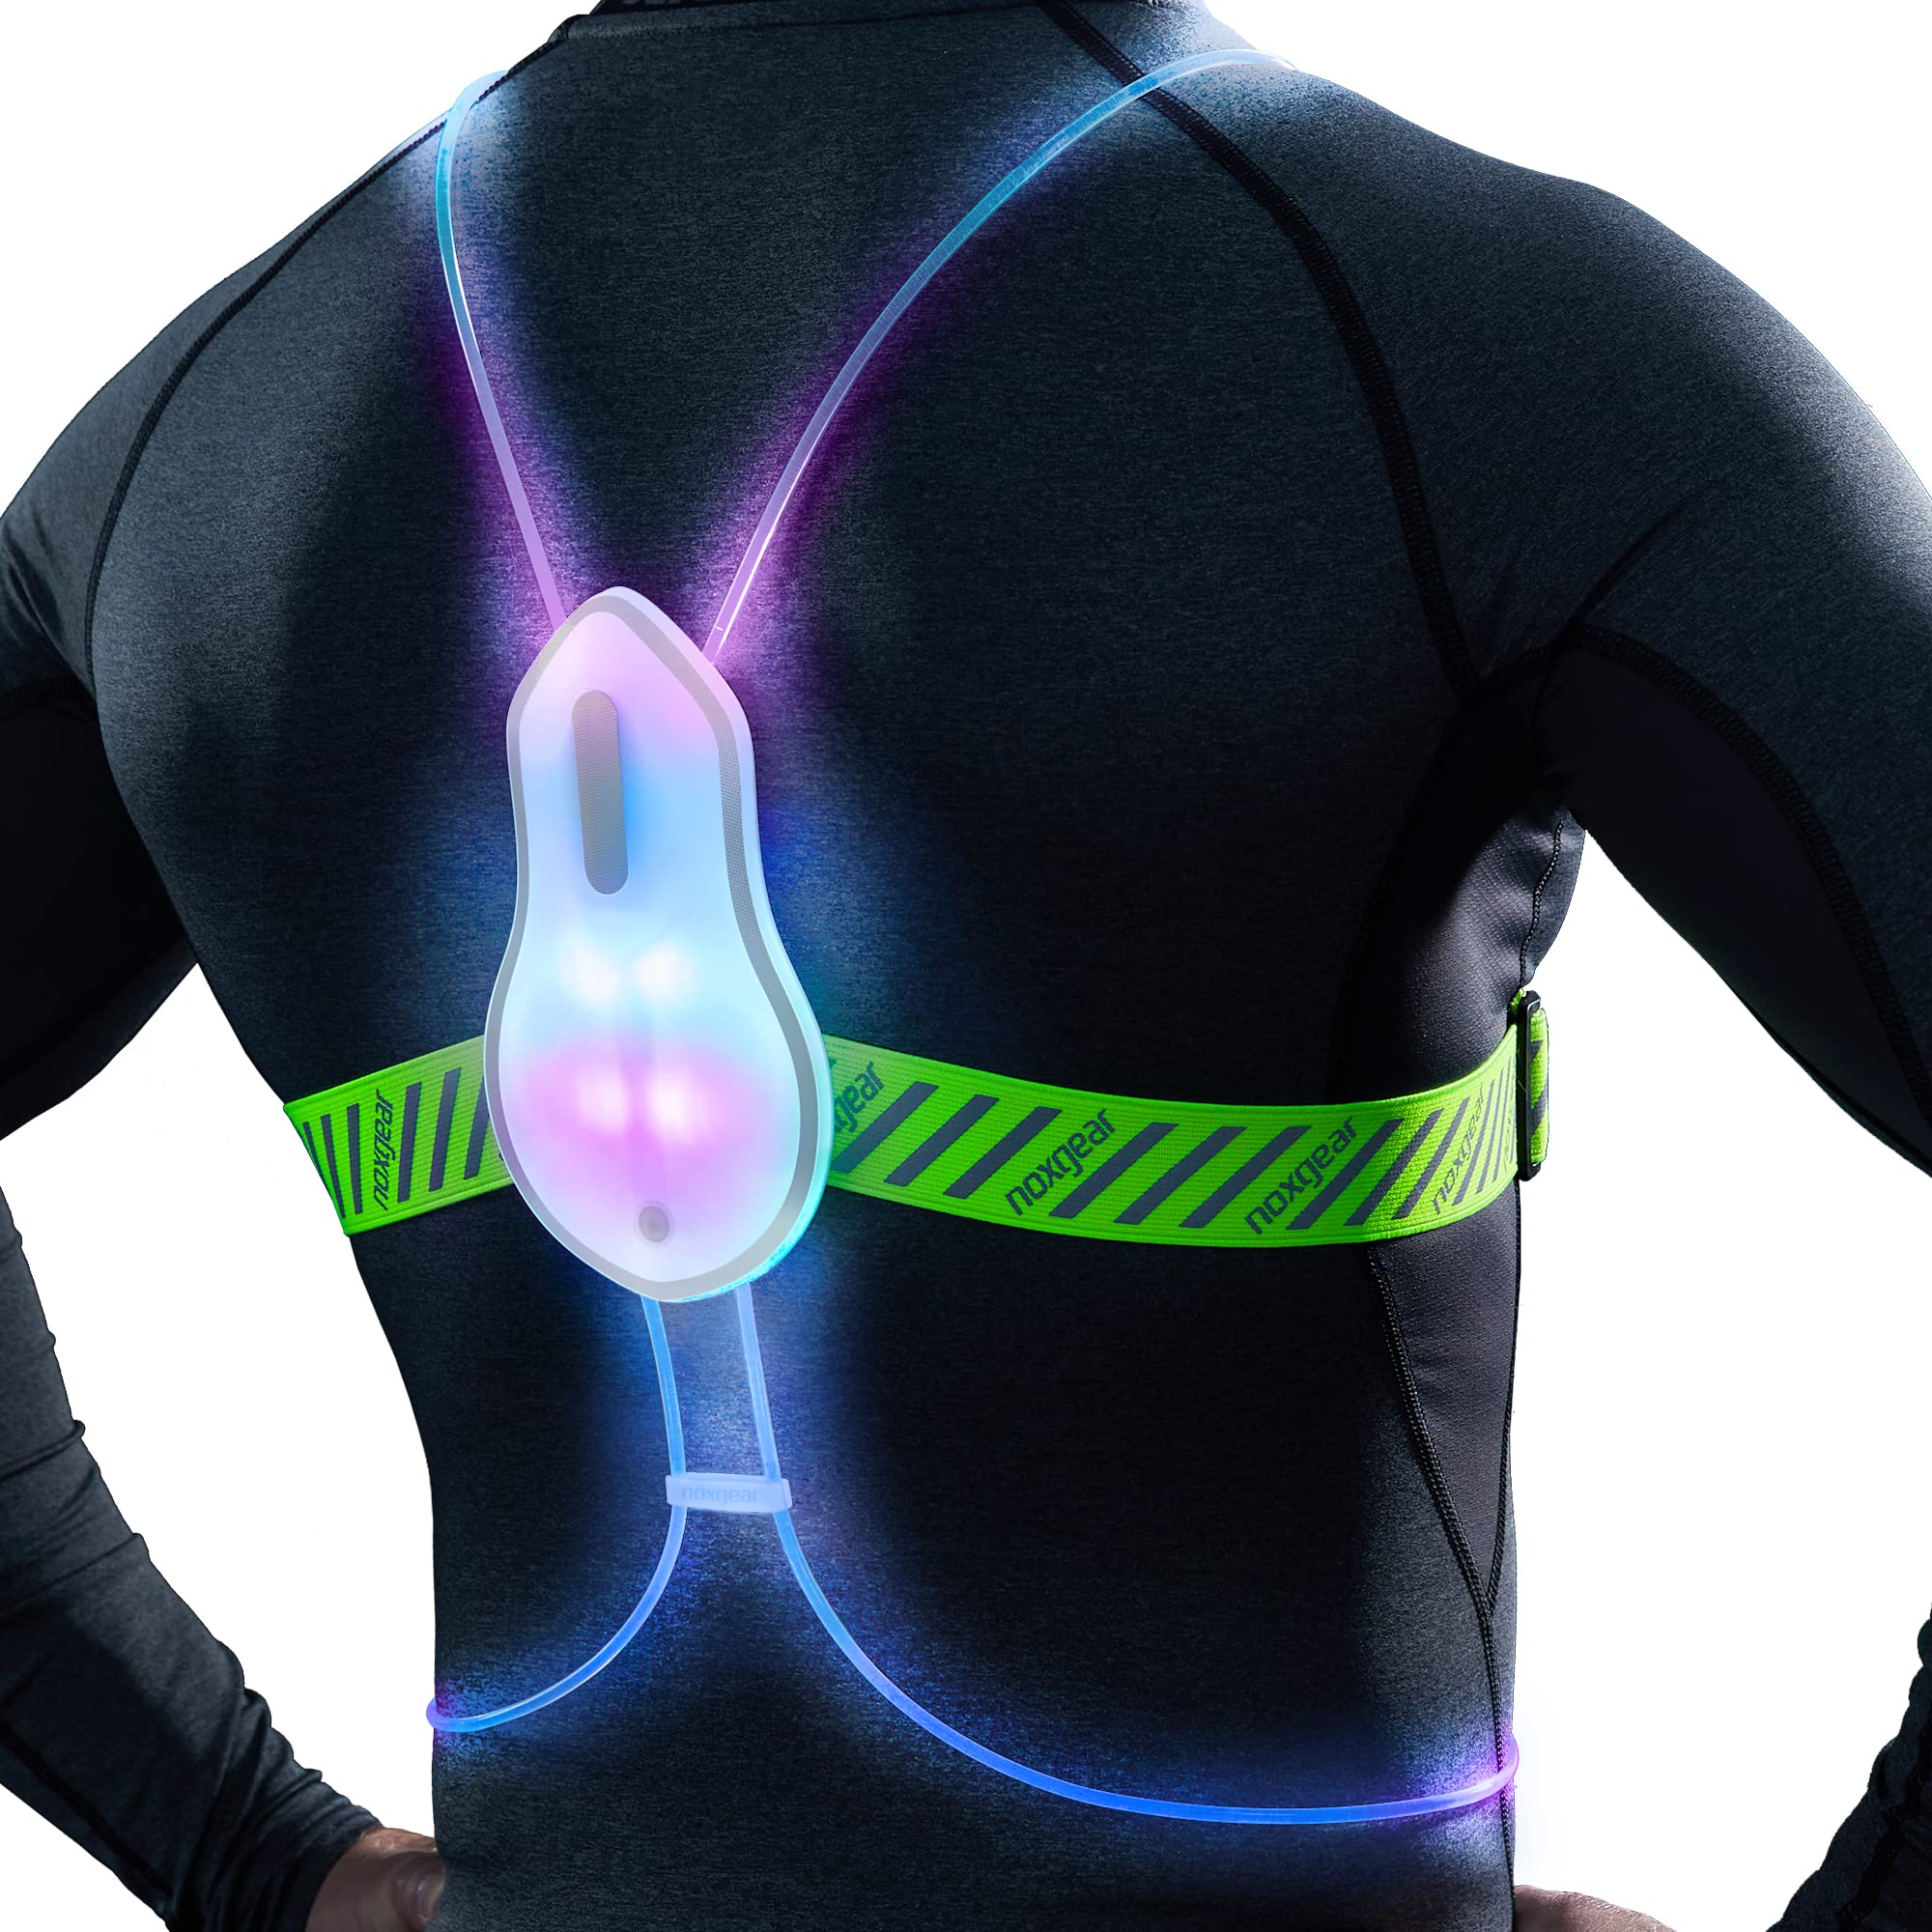 noxgear Tracer2 - Multicolor Illuminated, Reflective Vest for Running or Cycling (Rechargeable, Waterproof)